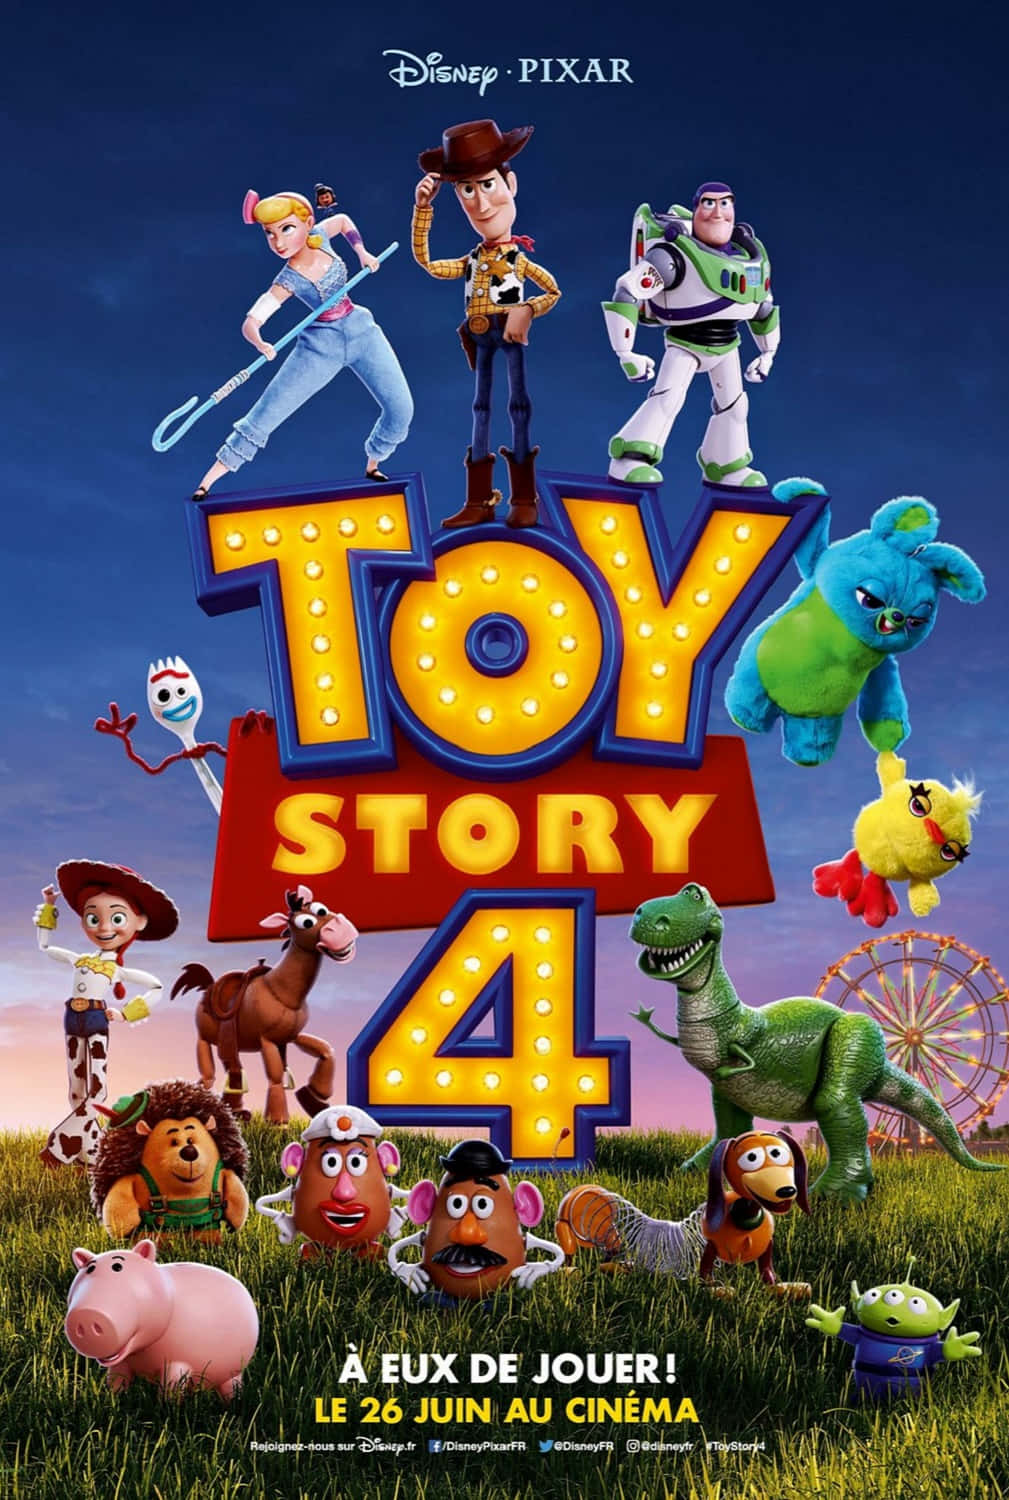 "The mischievous pair of Forky and Woody your child knows and loves - reunite in Toy Story 4 to embark on another thrilling adventure."